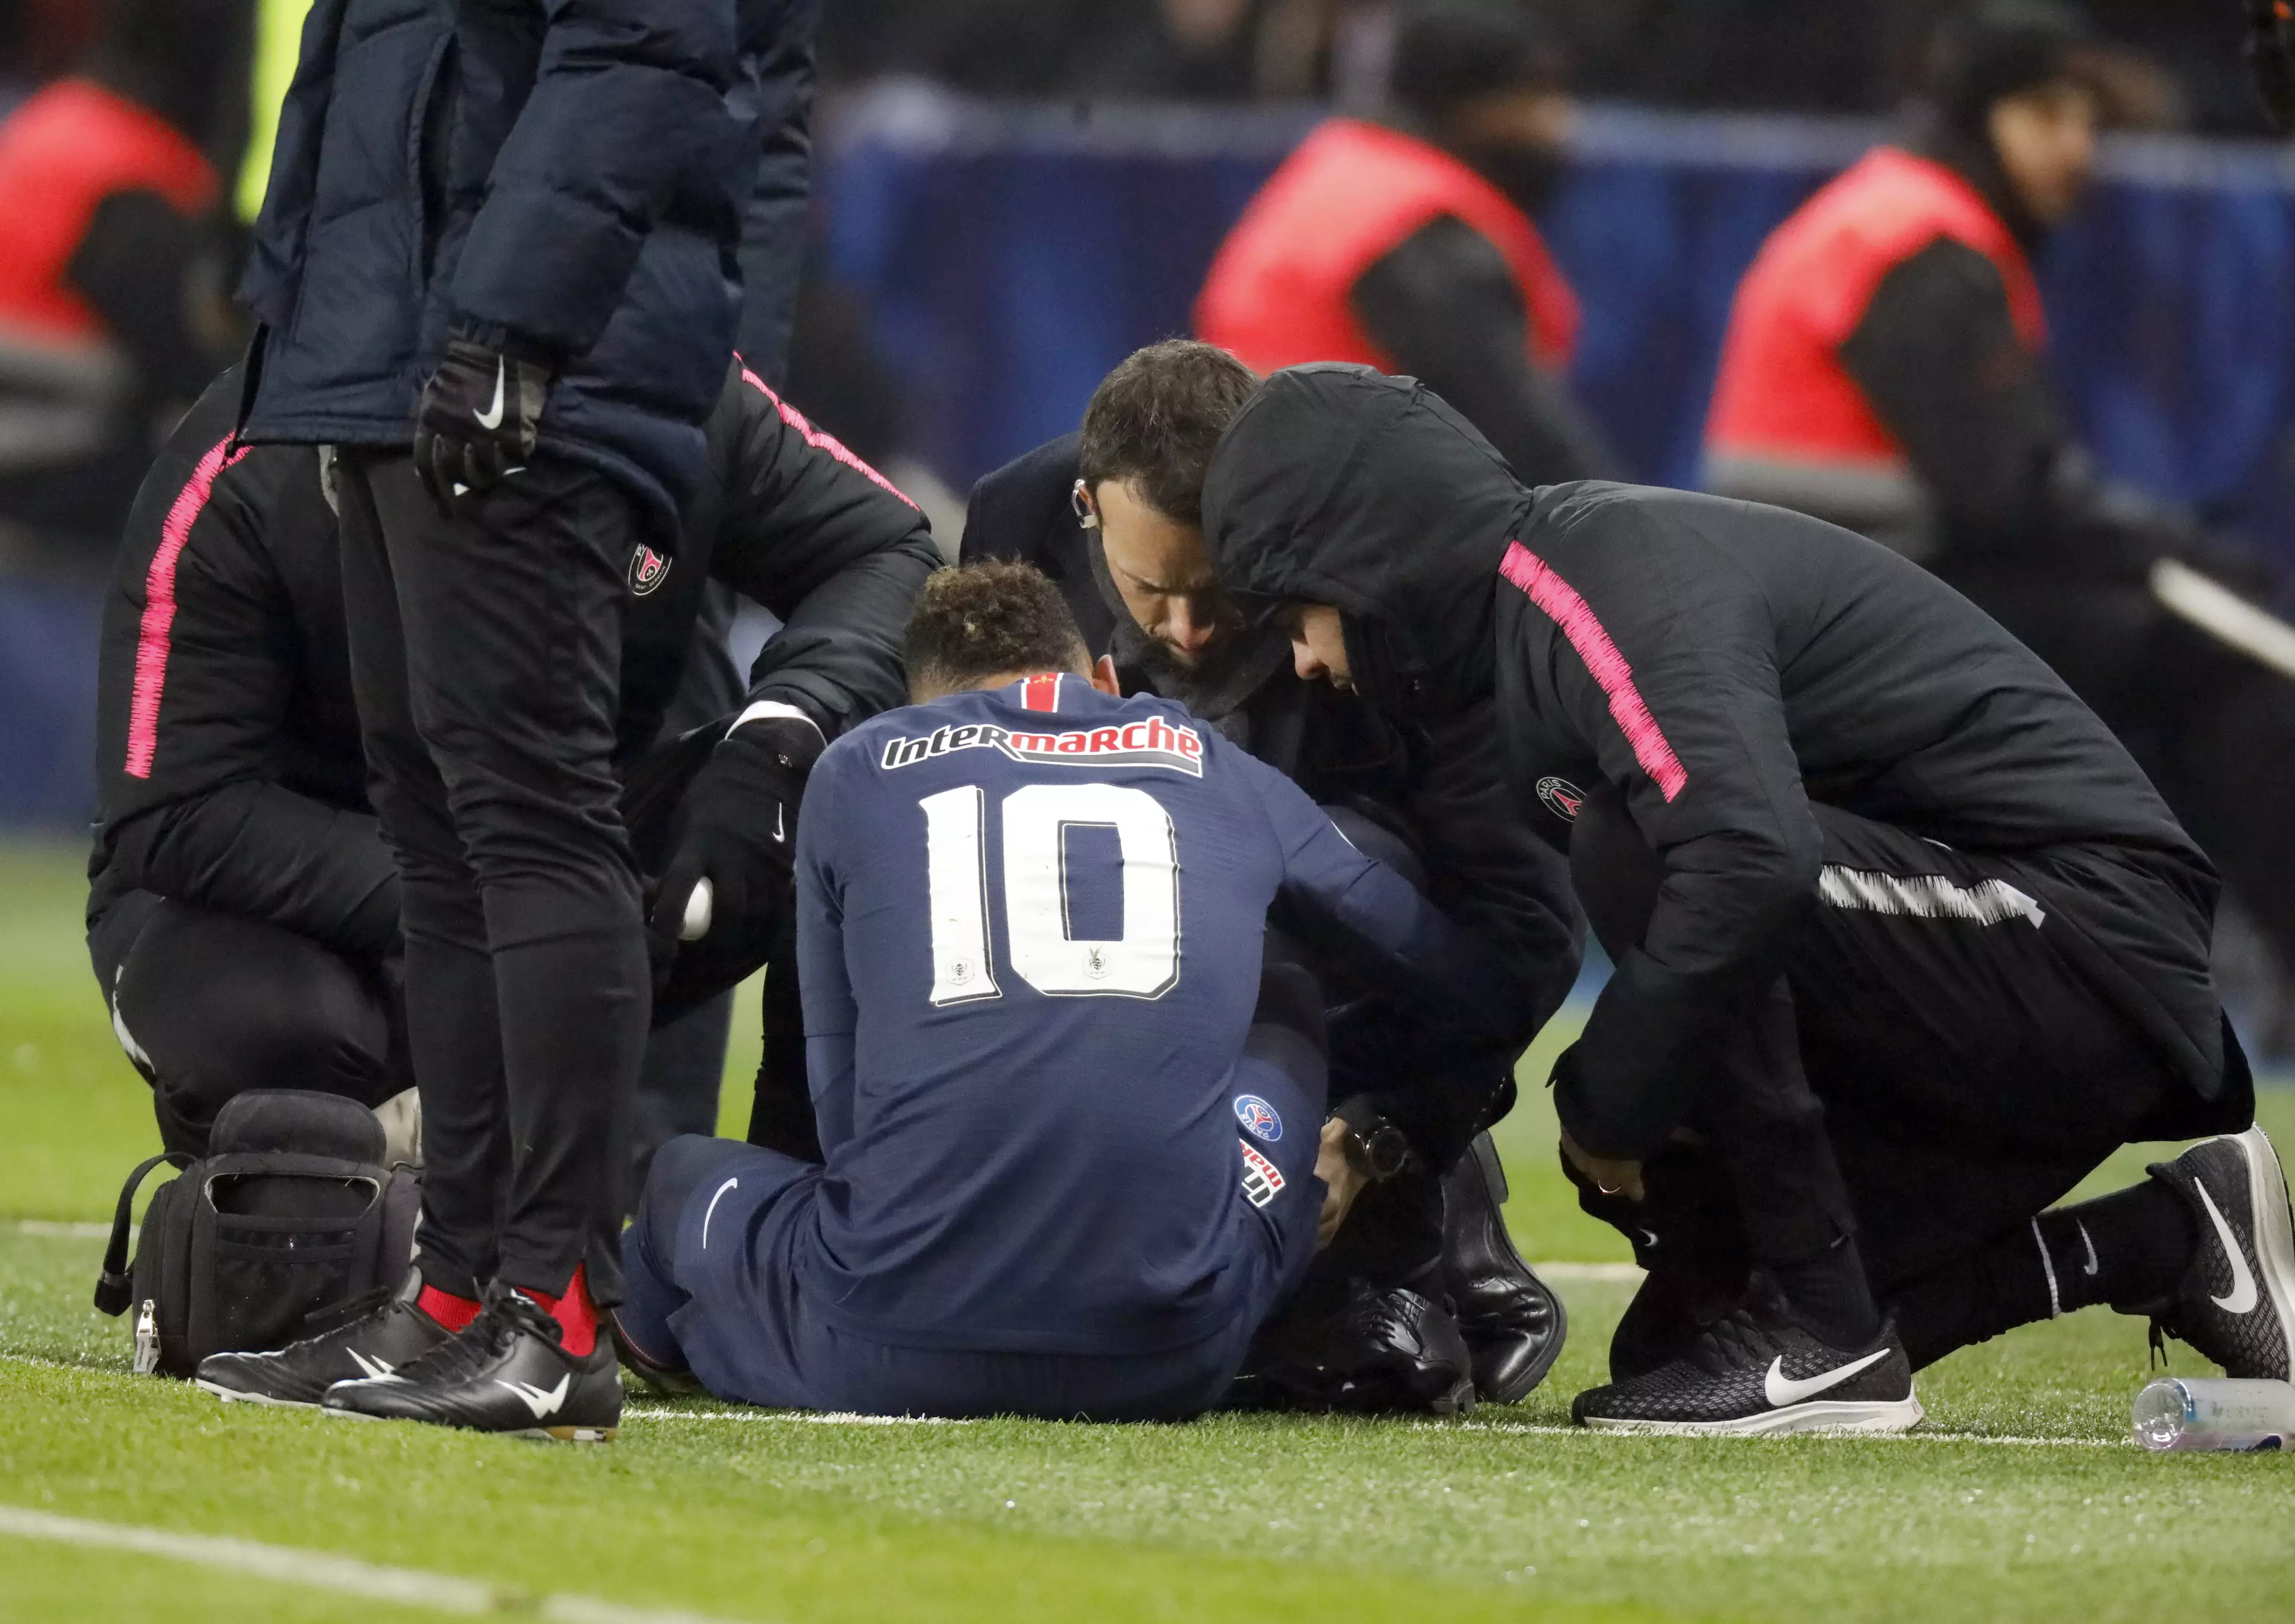 Neymar's injury is a blow to PSG. Image: PA Images